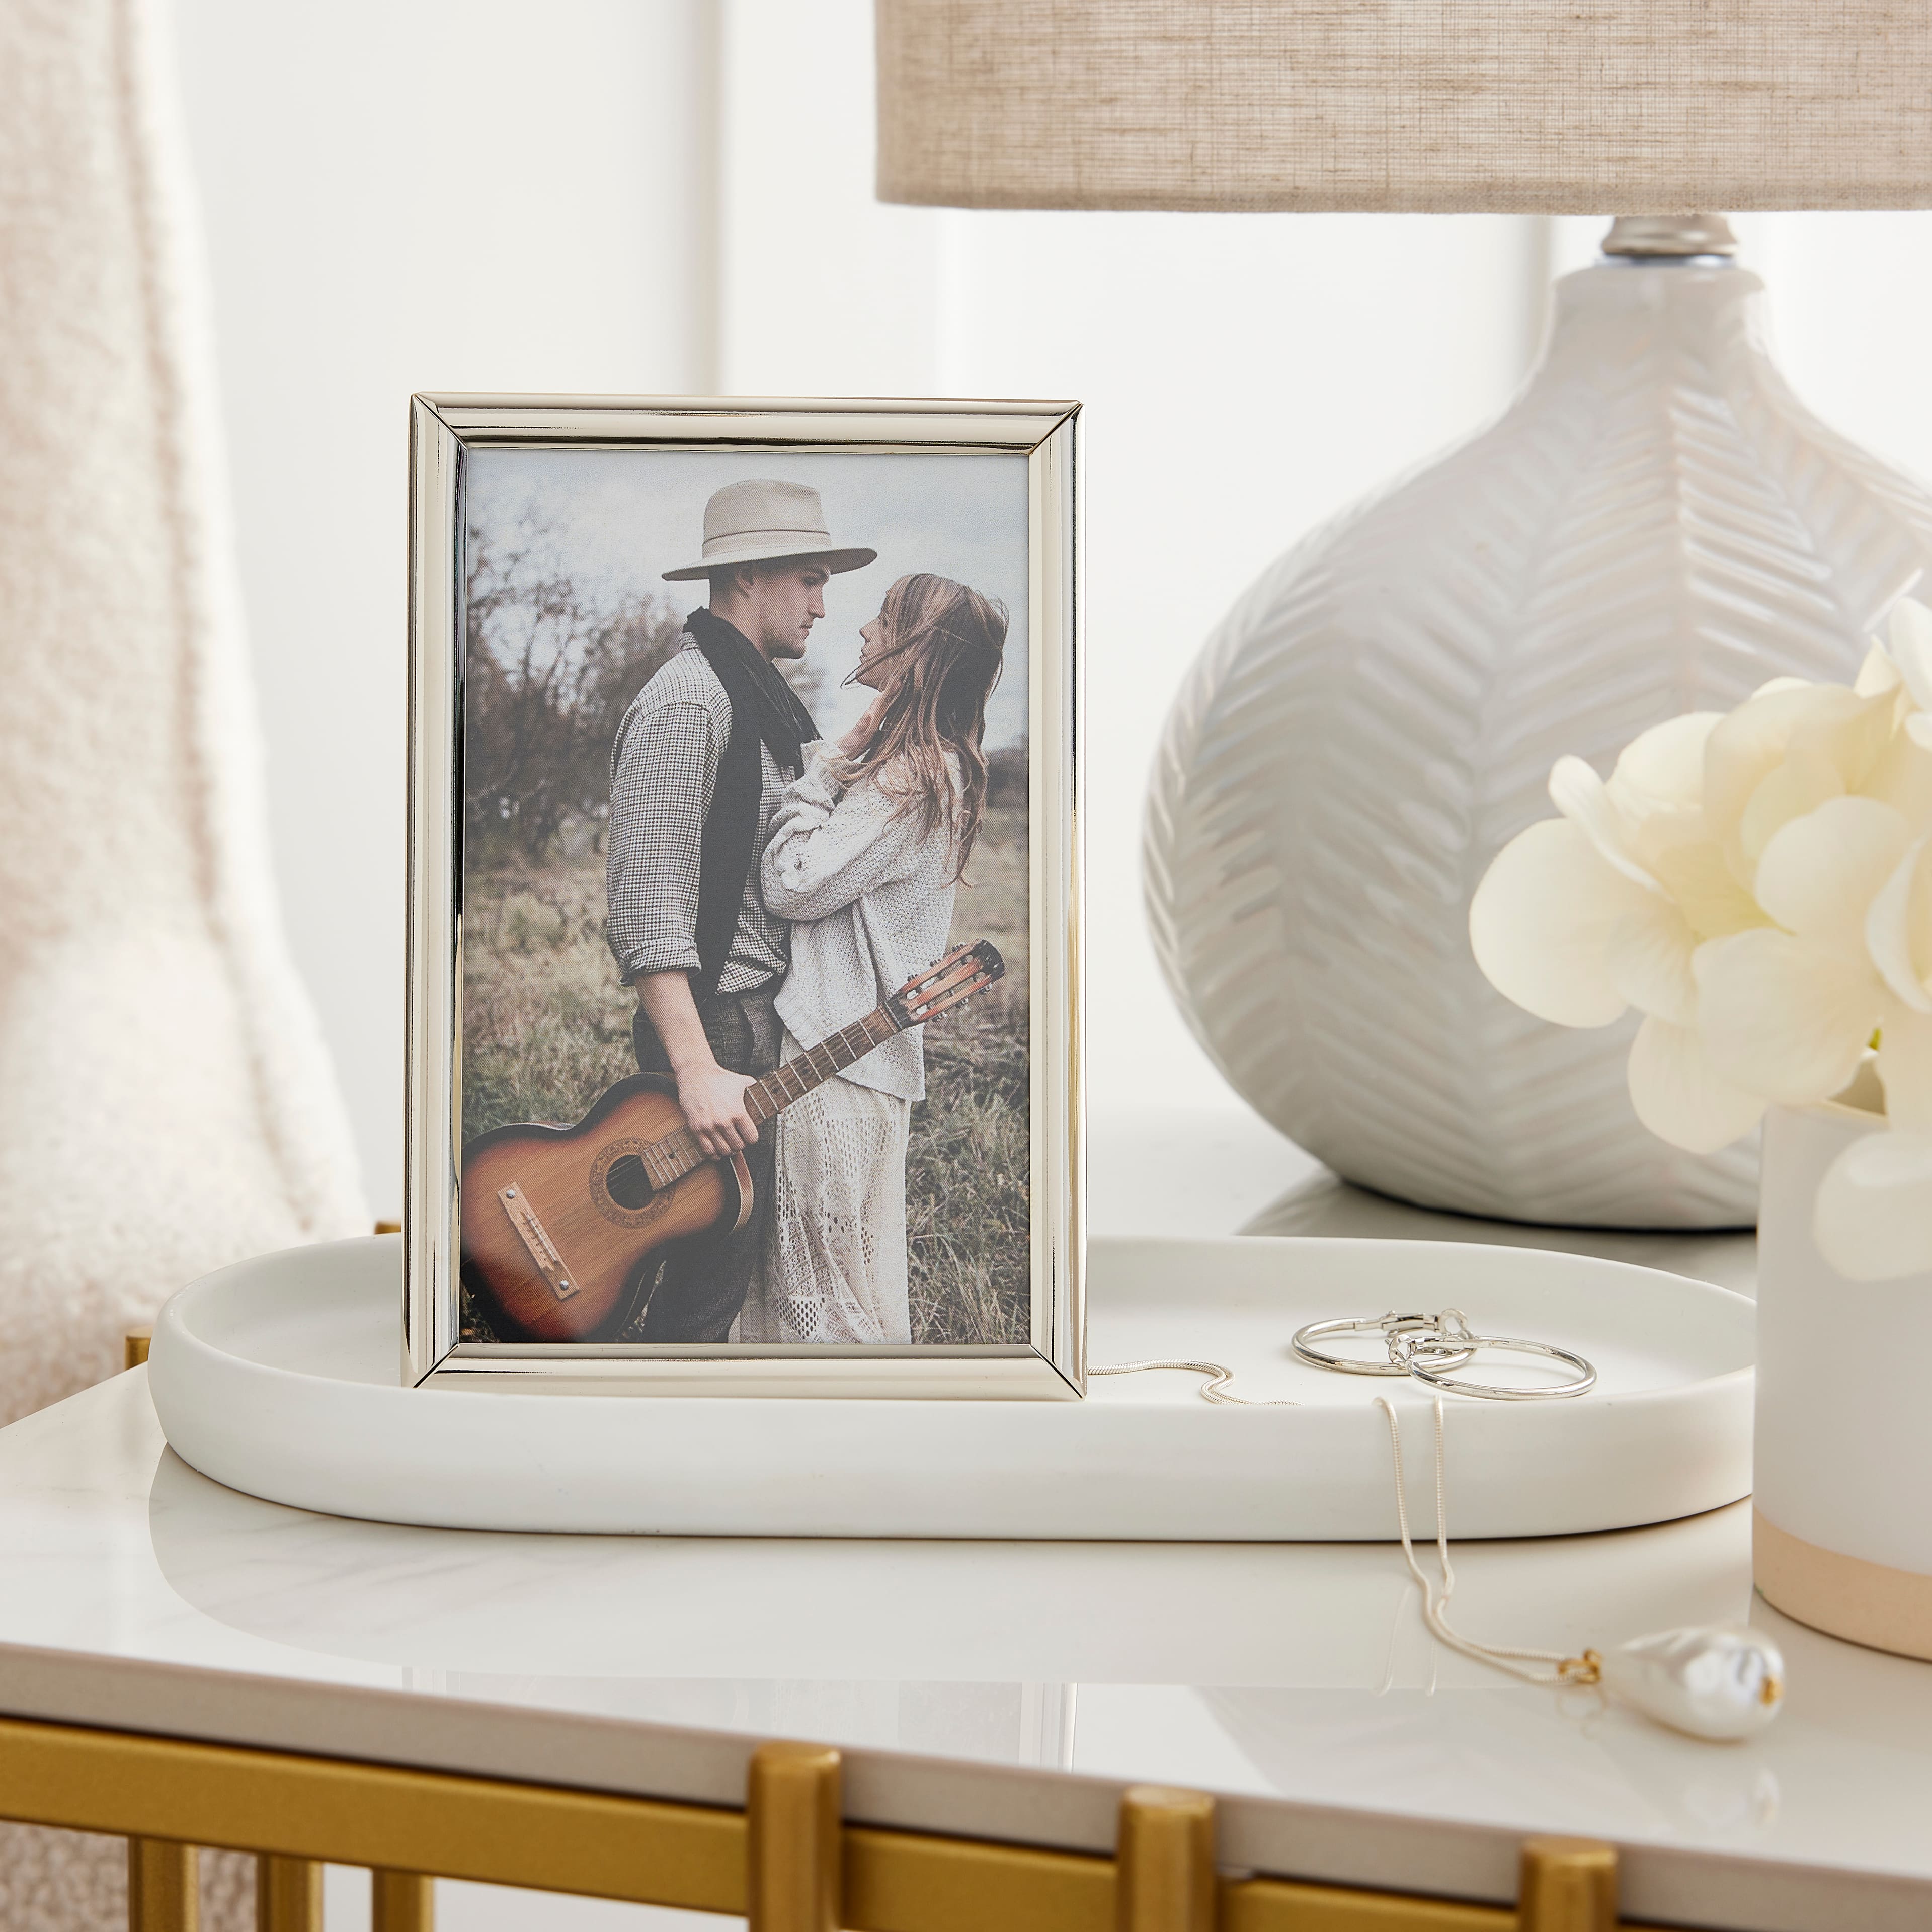 12 Pack: Silver Curved Profile 4&#x22; x 6&#x22; Frame, Simply Essentials&#x2122; by Studio D&#xE9;cor&#xAE;